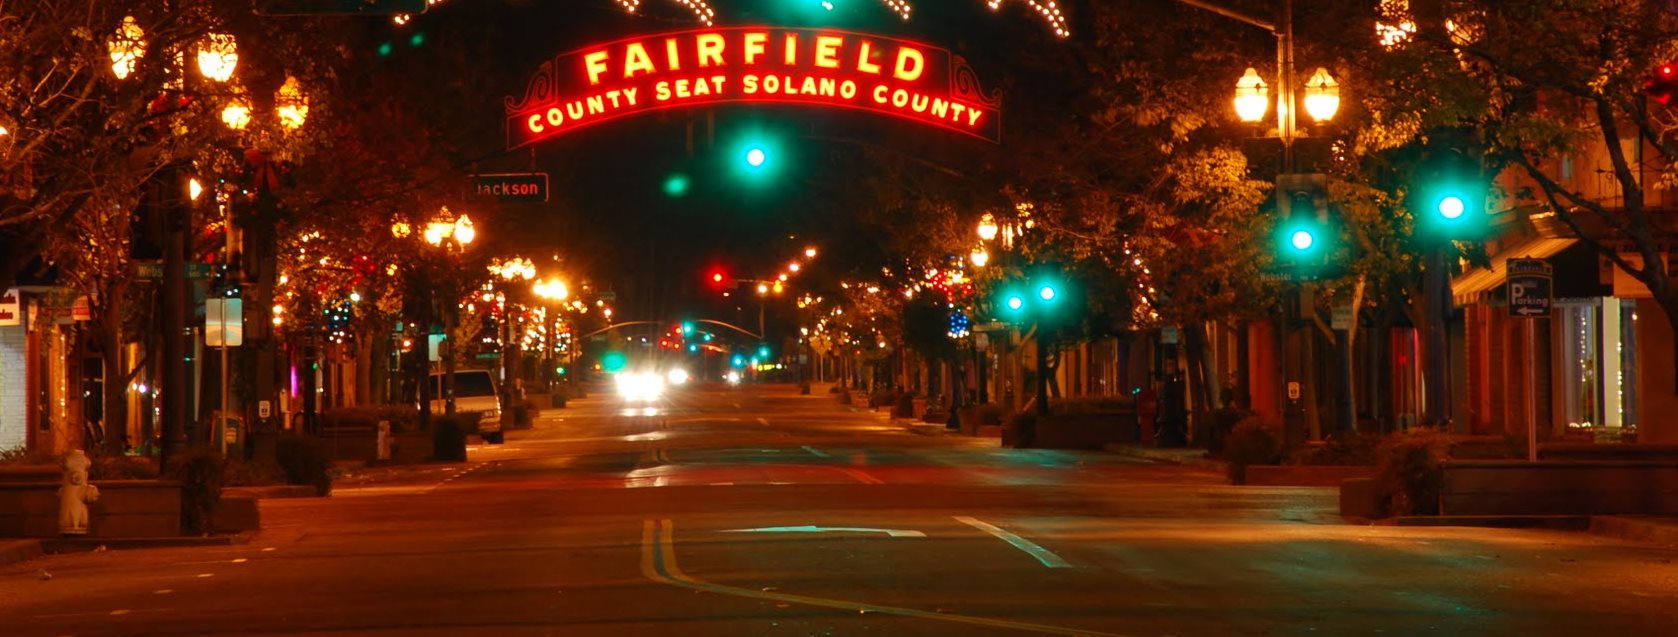 Nighttime photo of downtown Fairfiled